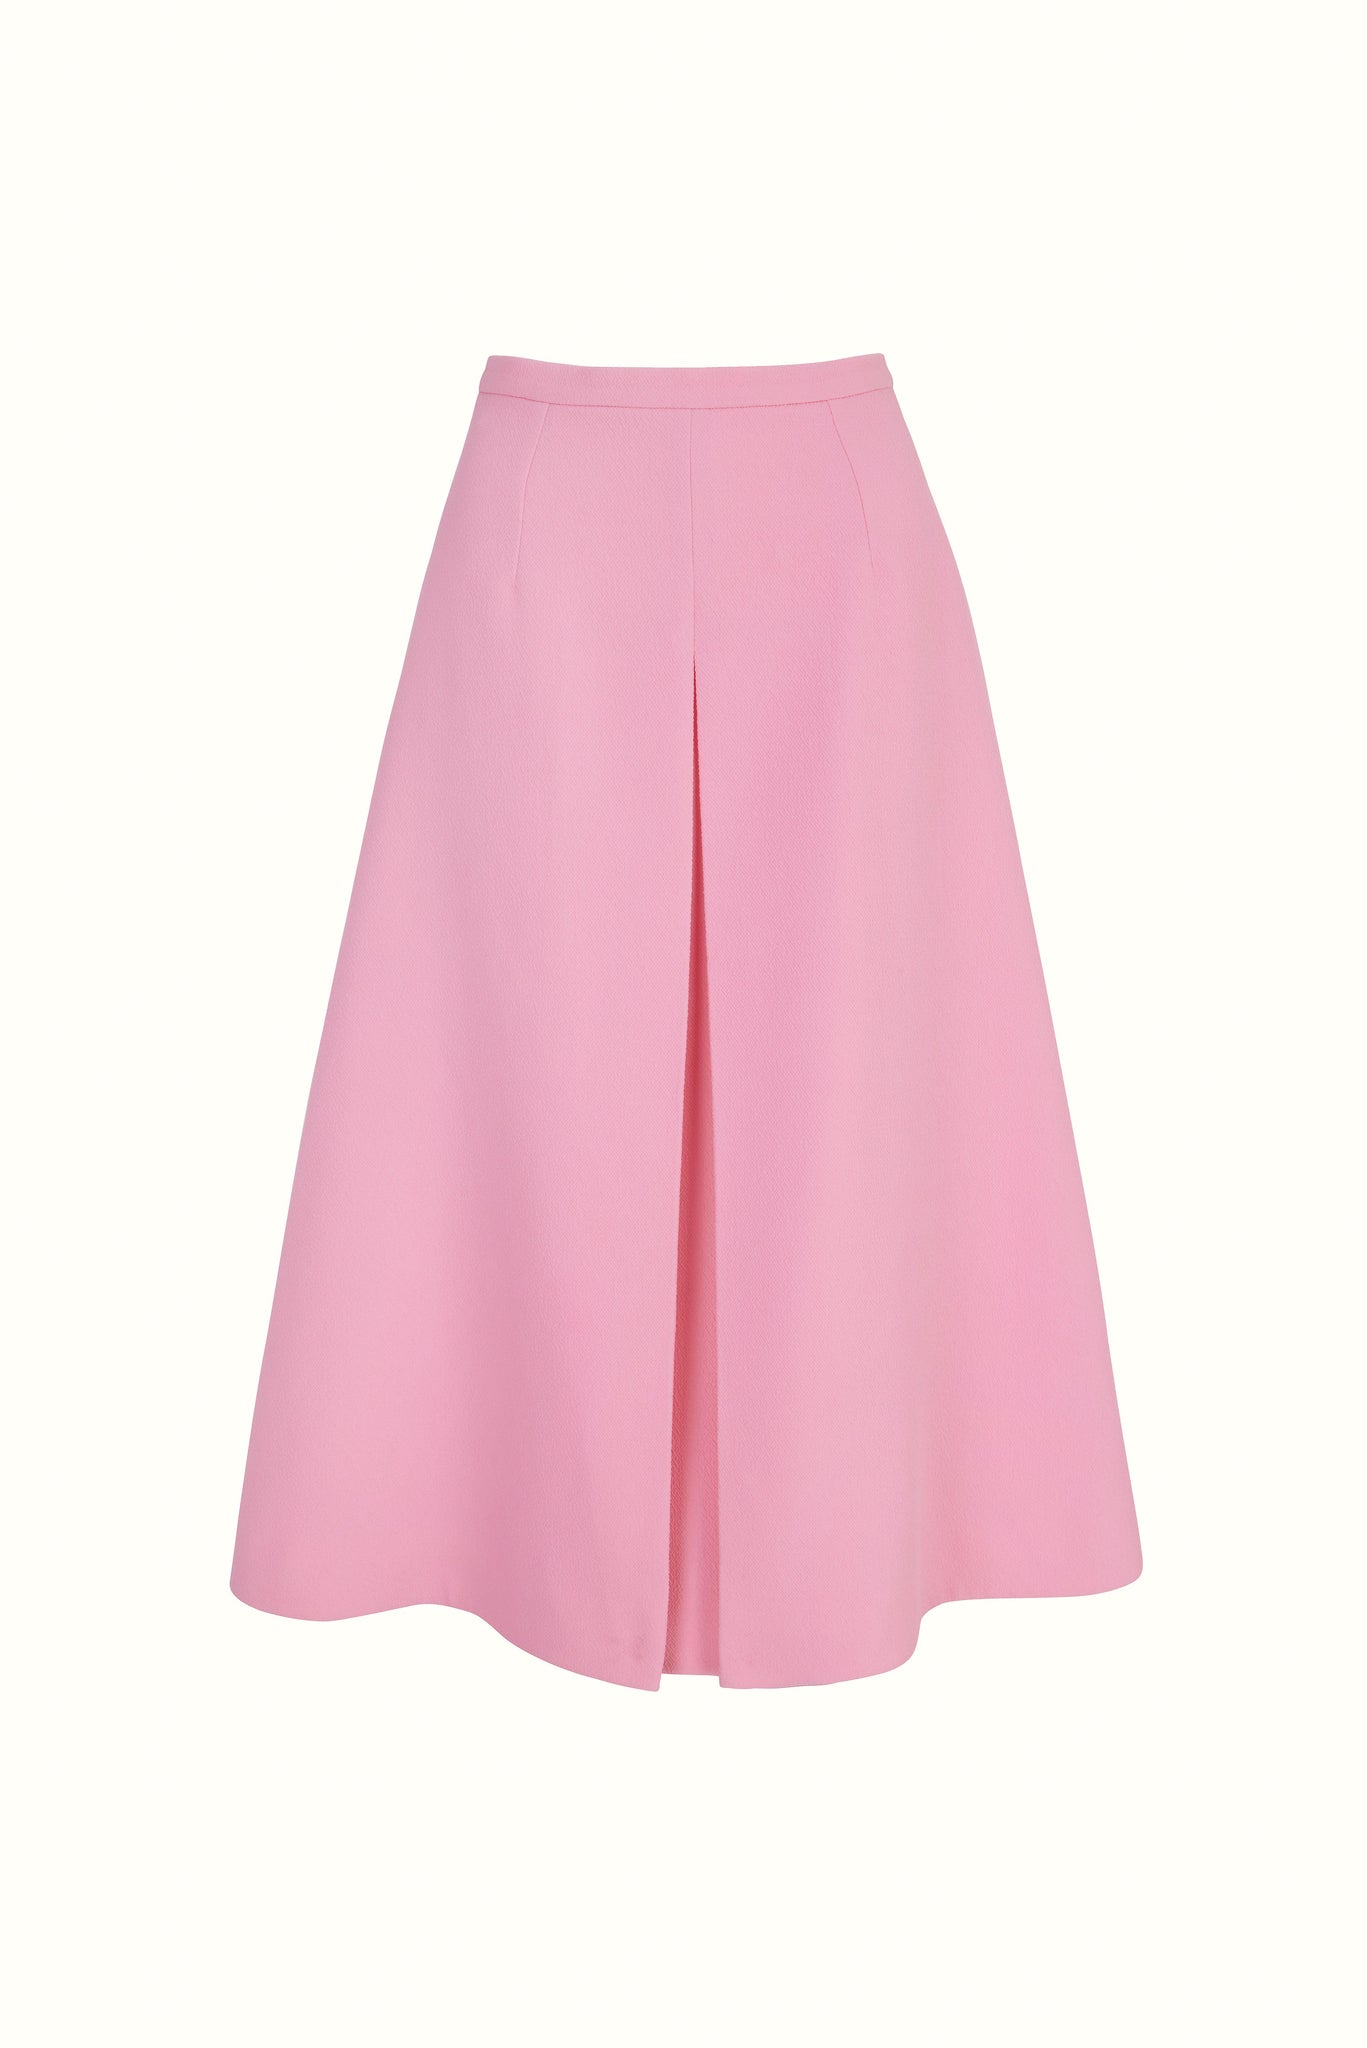 Sato A-Line Inverted Pleat Skirt In Pink Double Crepe | Emilia Wickstead